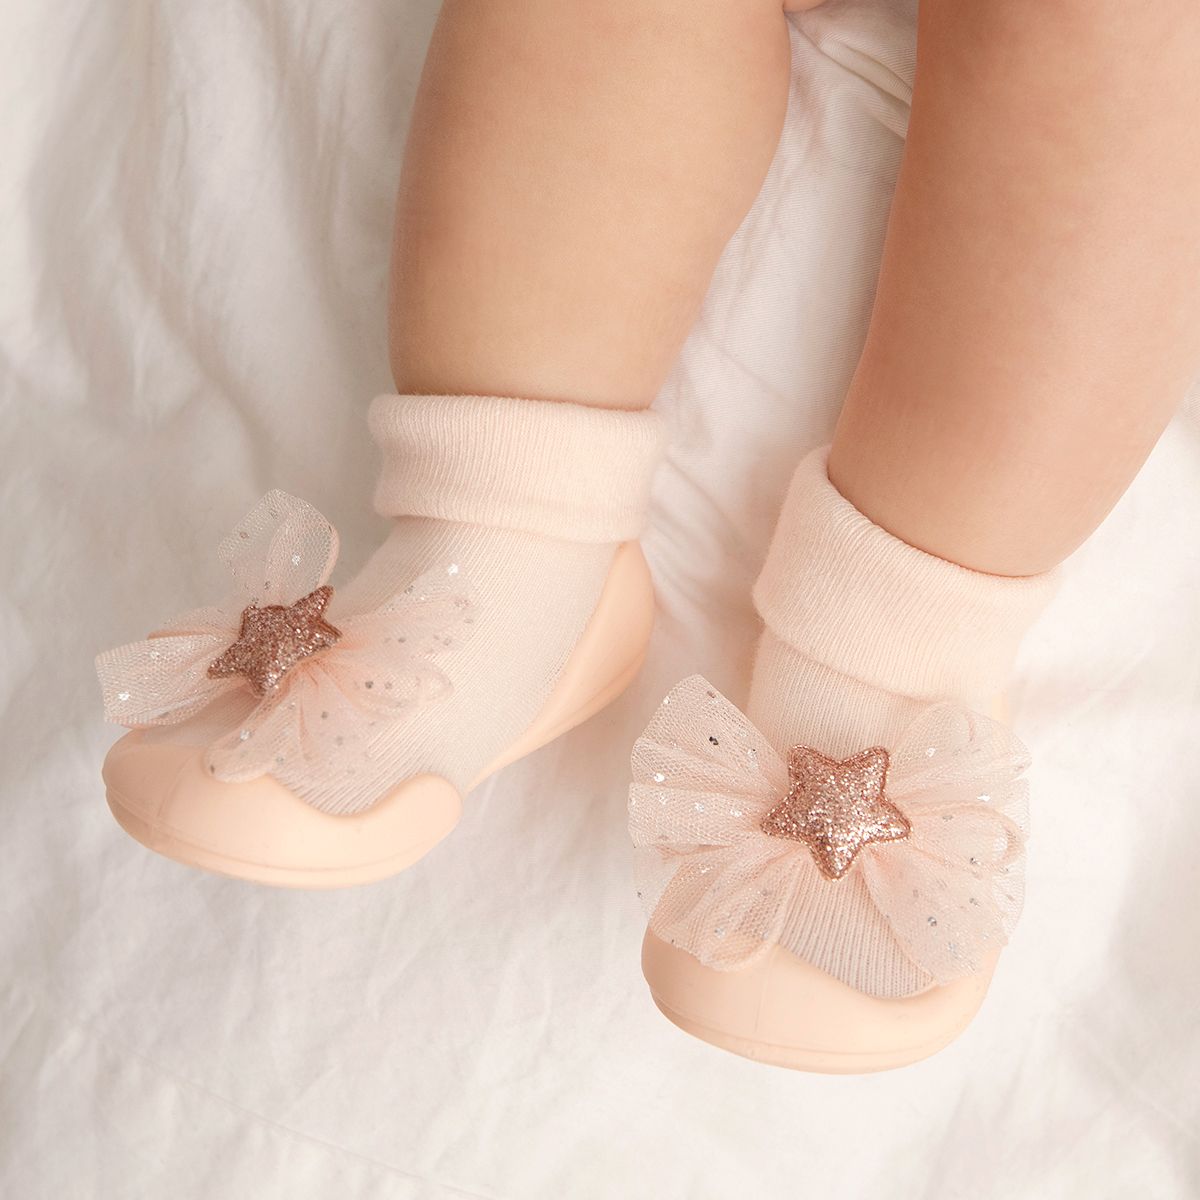 Twinkle Star Baby First Walking Shoes: Easy-to-wear, elastic baby shoes with honeycomb outsole for slip resistance. Gentle flex for delicate baby foot cartilage and optimal support in learning to walk